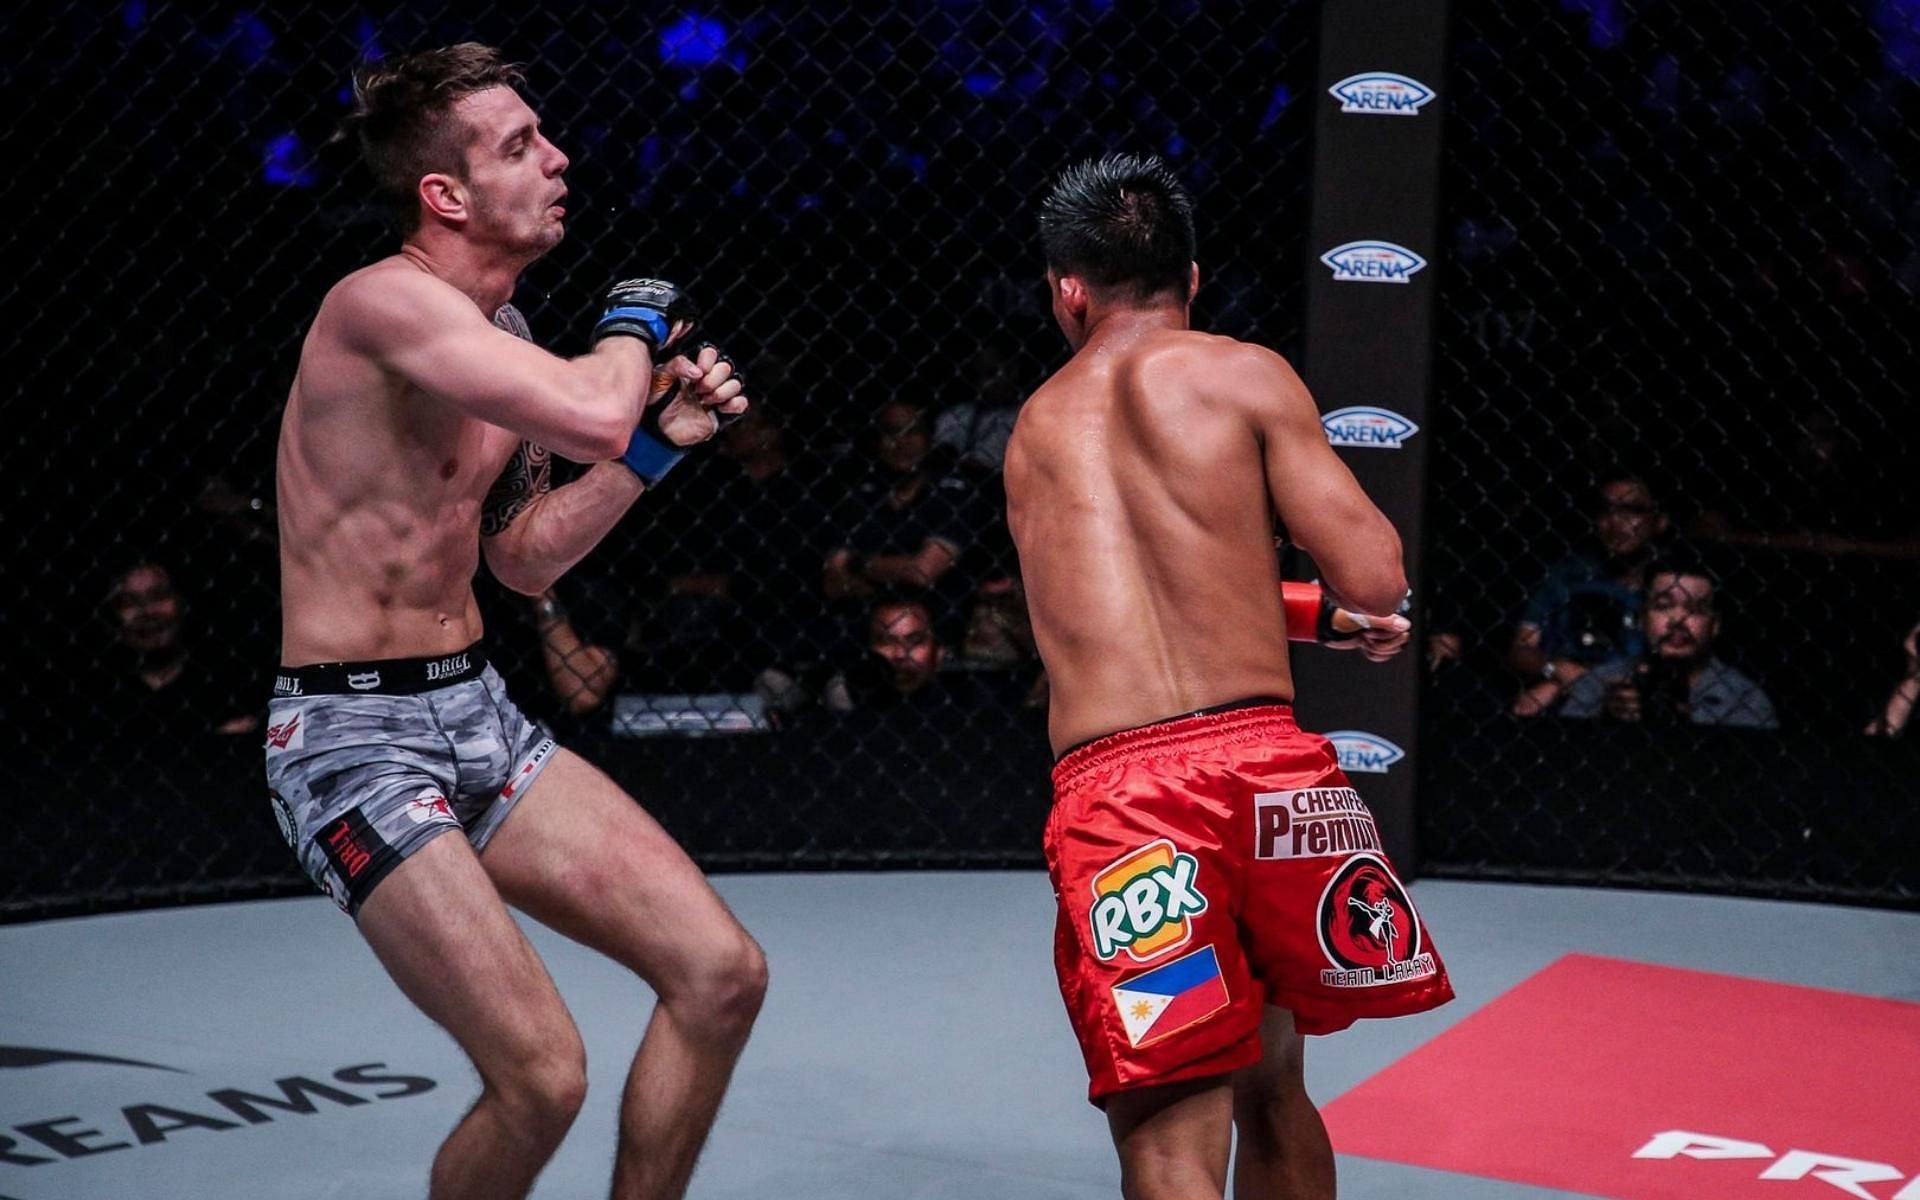 Former ONE featherweight champion Honorio Banario (right) scored one of the greatest knockouts in ONE Championship history. (Image courtesy of ONE Championship)